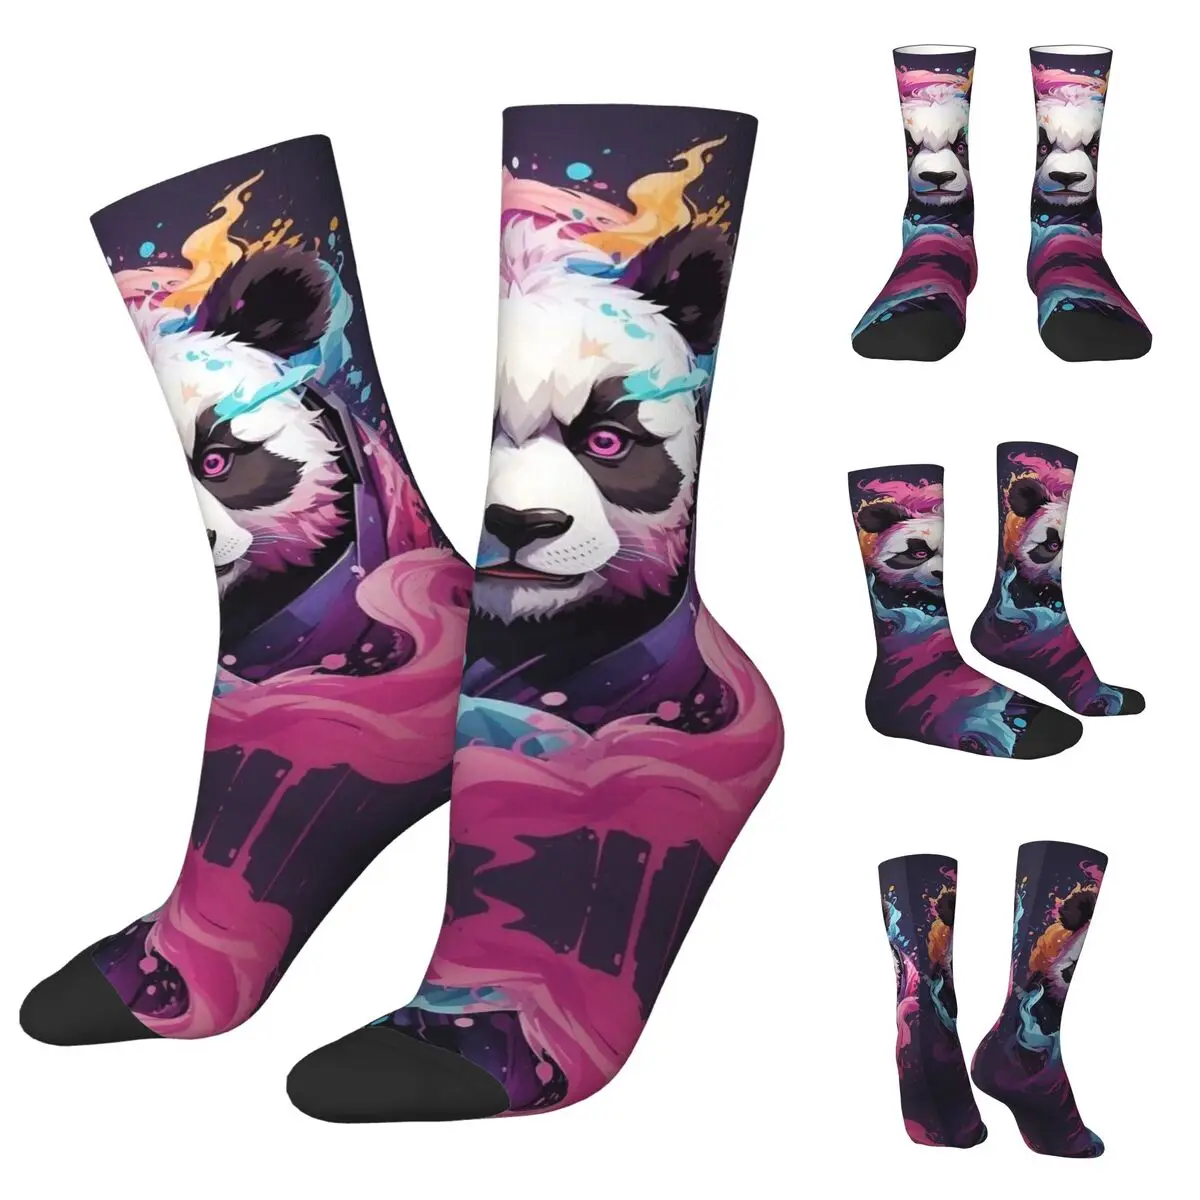 Cool Animals, Lions, Tigers, Gorillas Men Women Socks,Motion Beautiful printing Suitable for all seasons Dressing Gifts